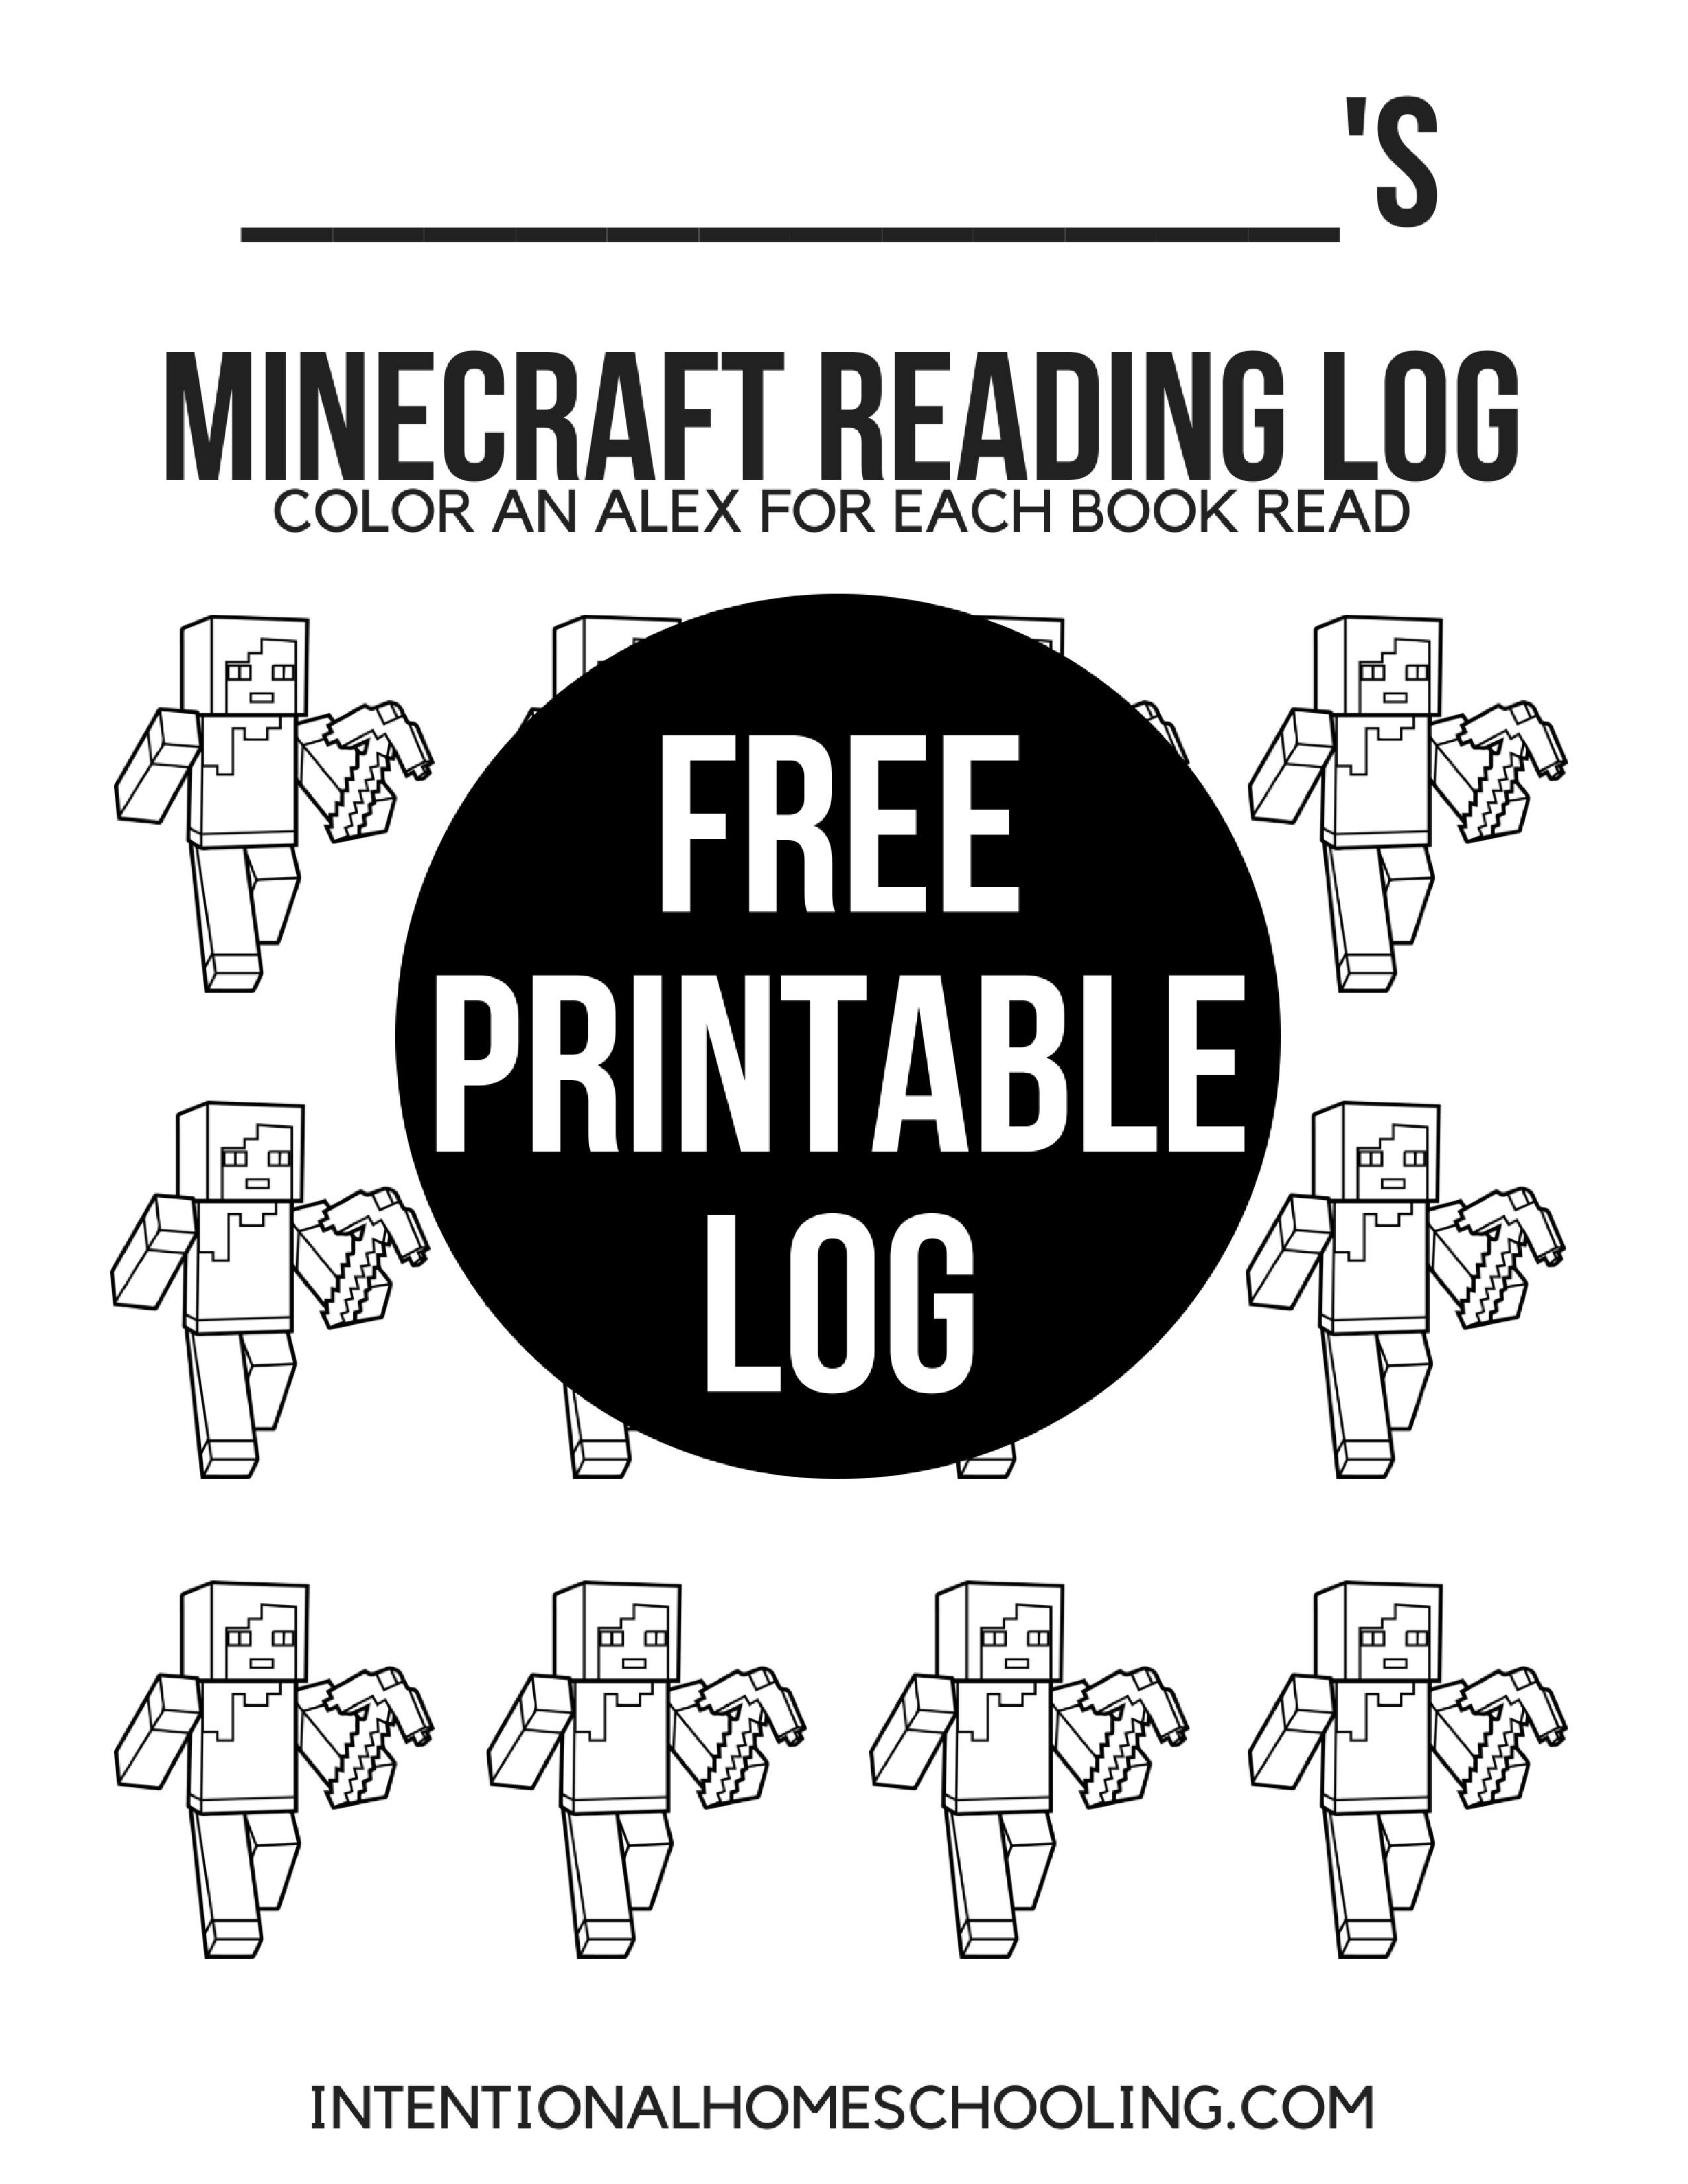 Printable Minecraft Reading Log - free printable reading log to inspire kids to read more!